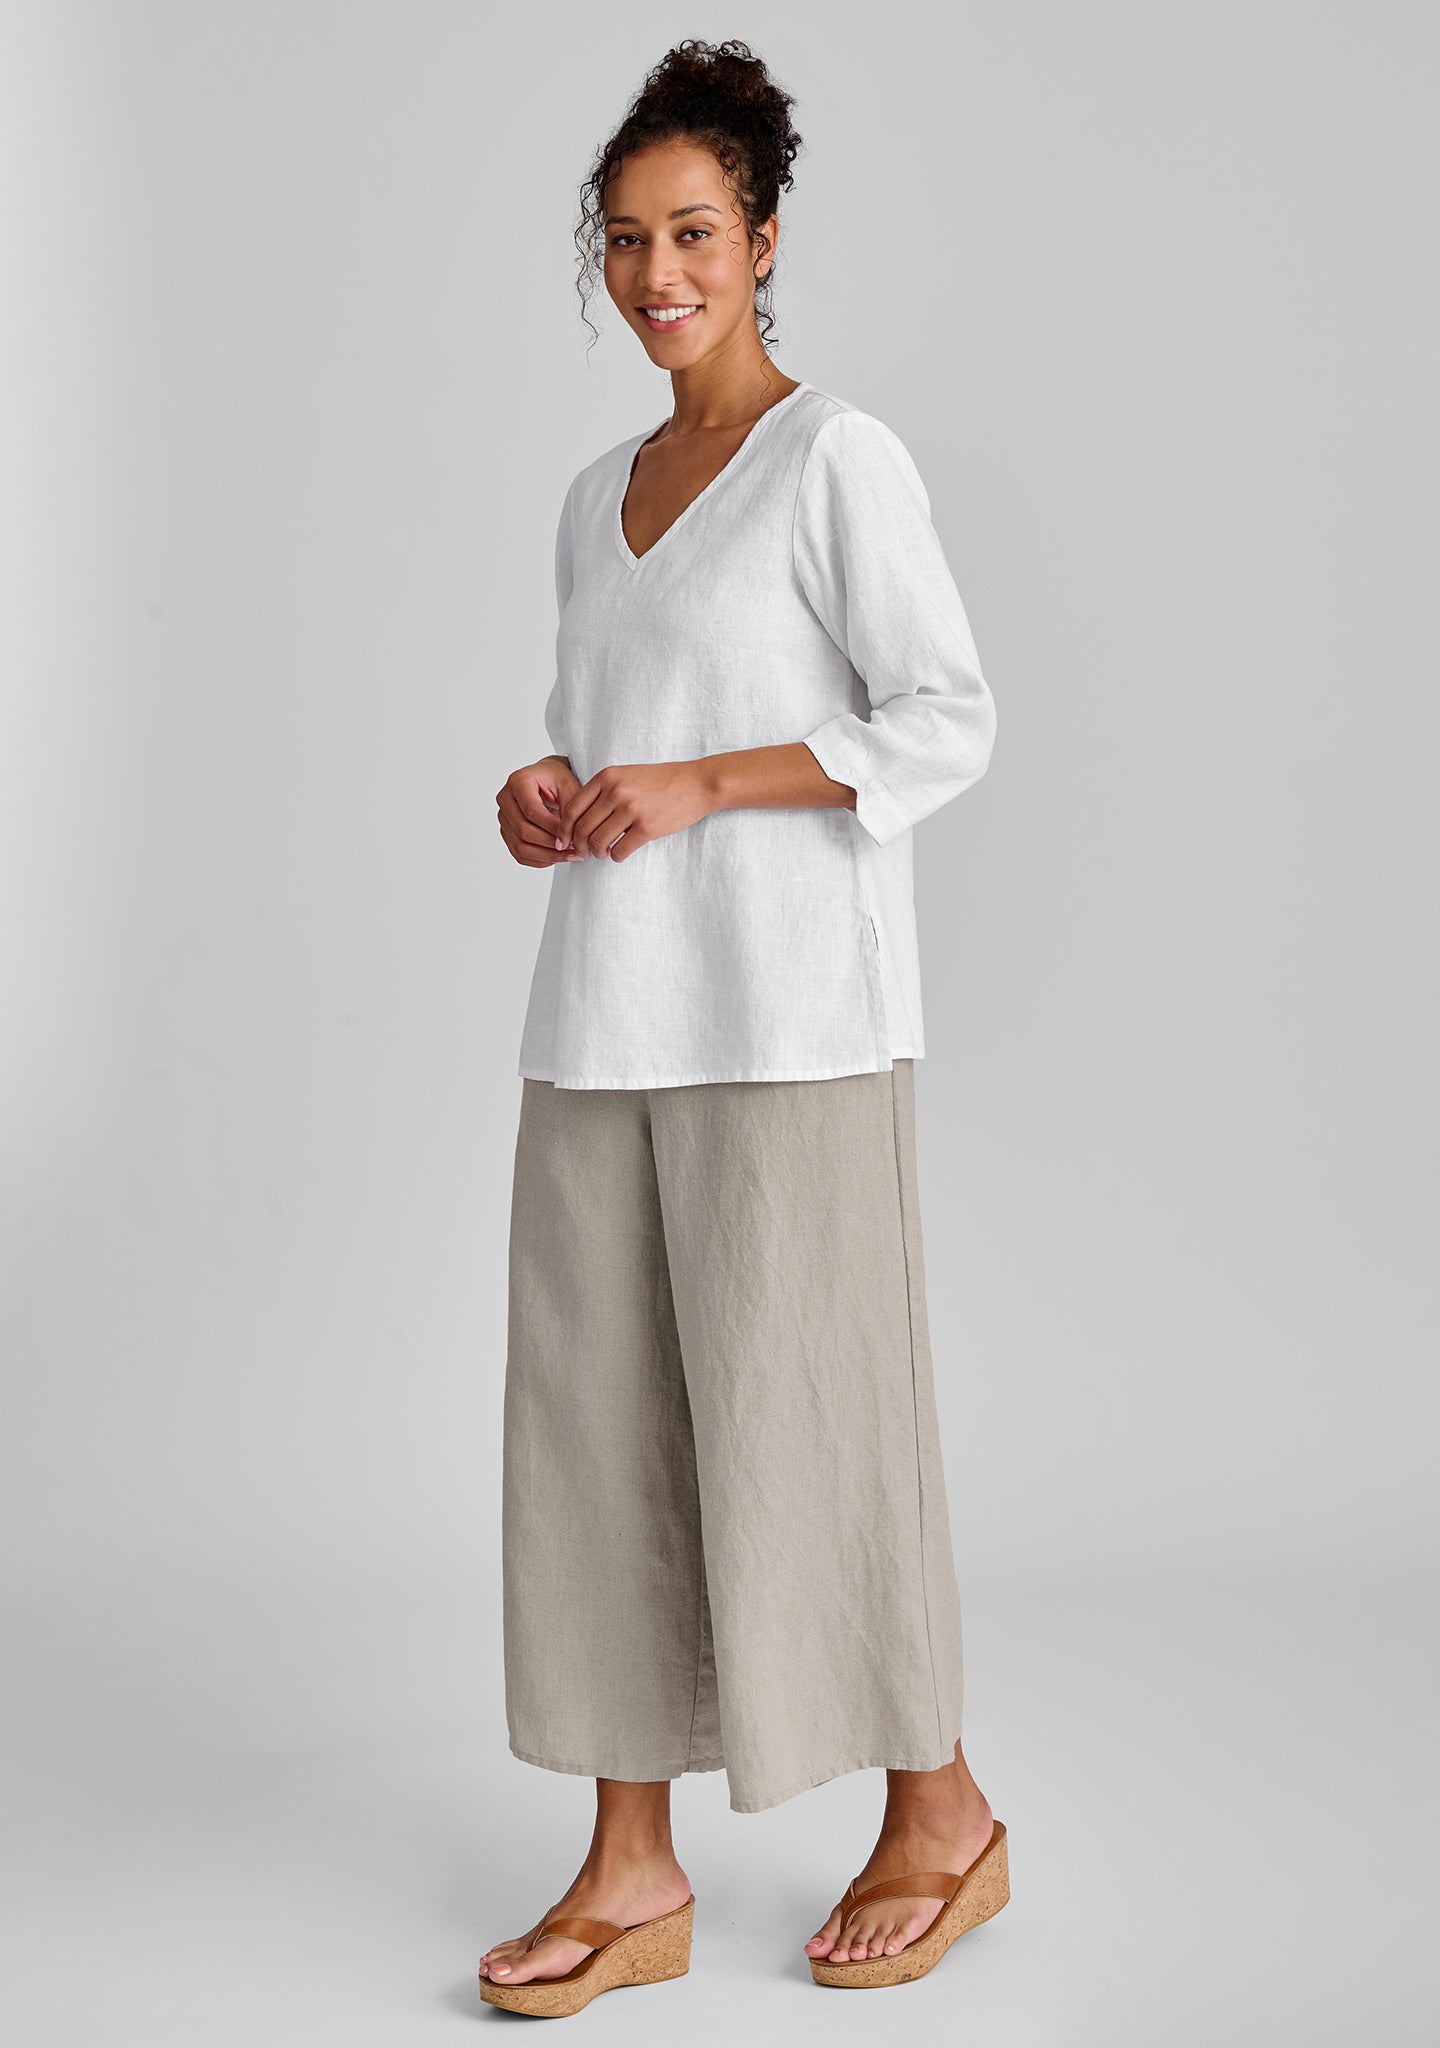 FLAX linen shirt in white with linen pants in natural